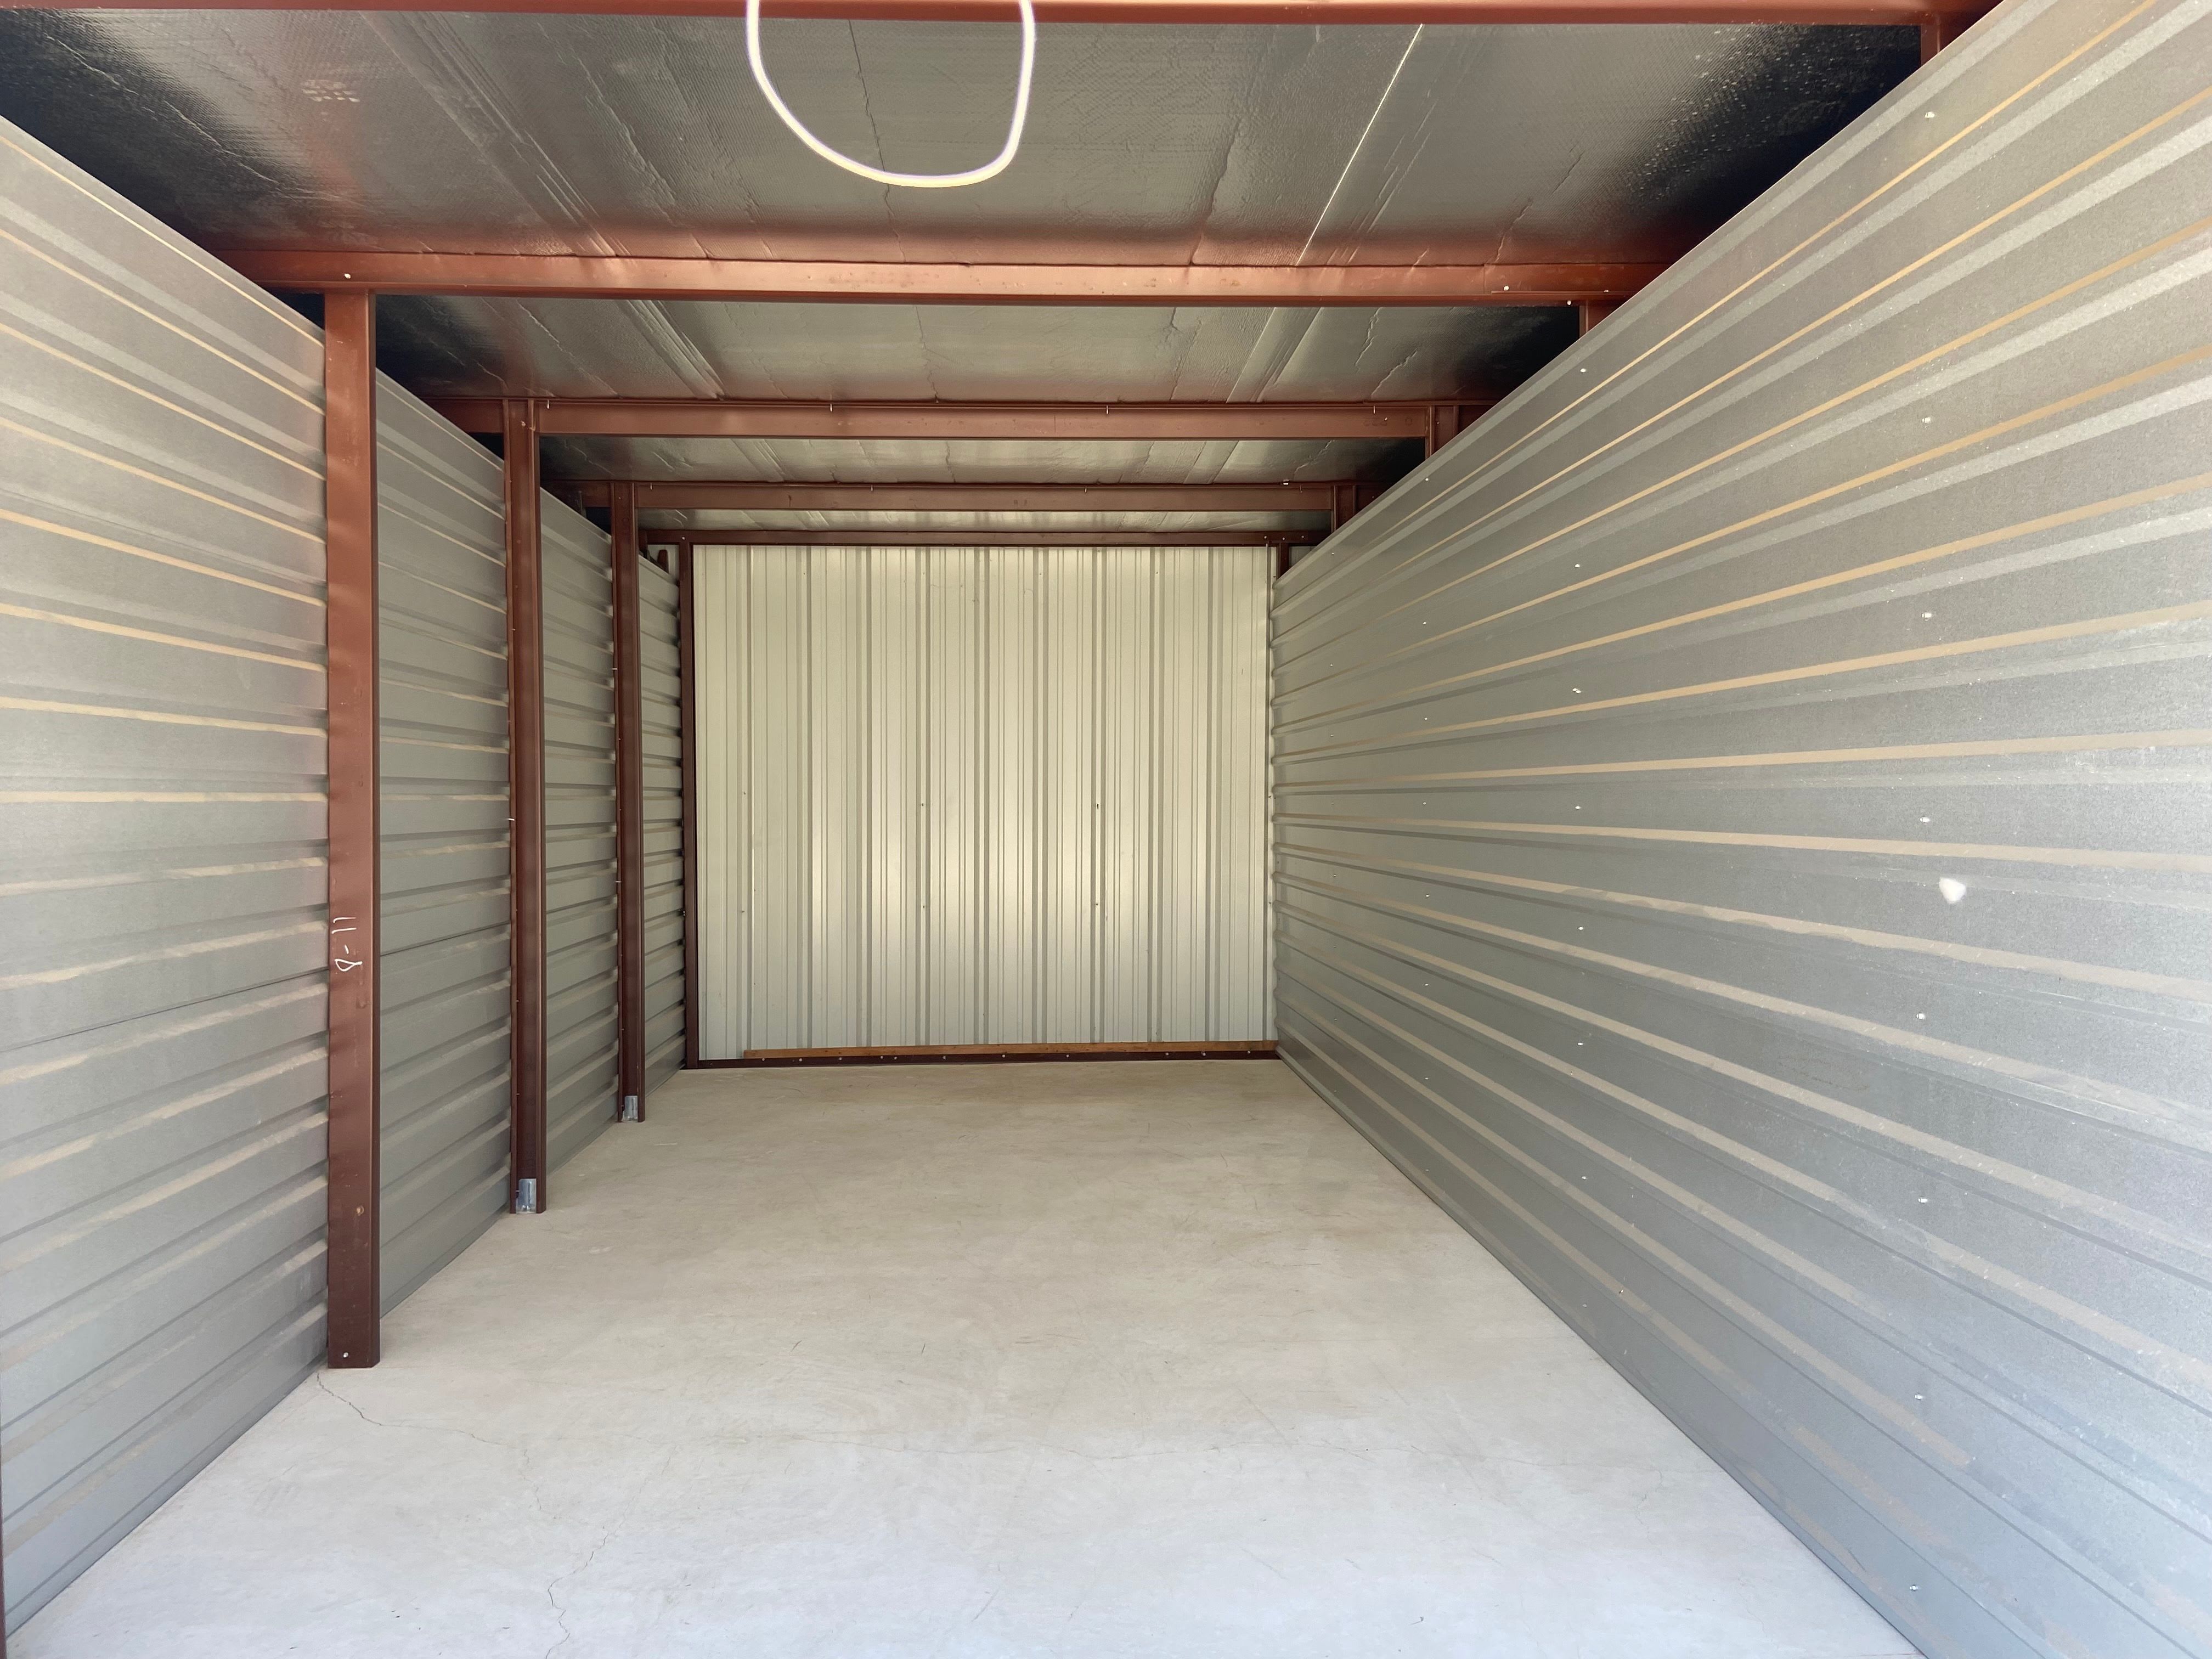 Learn more about features at KO Storage of Pleasanton in Pleasanton, Texas